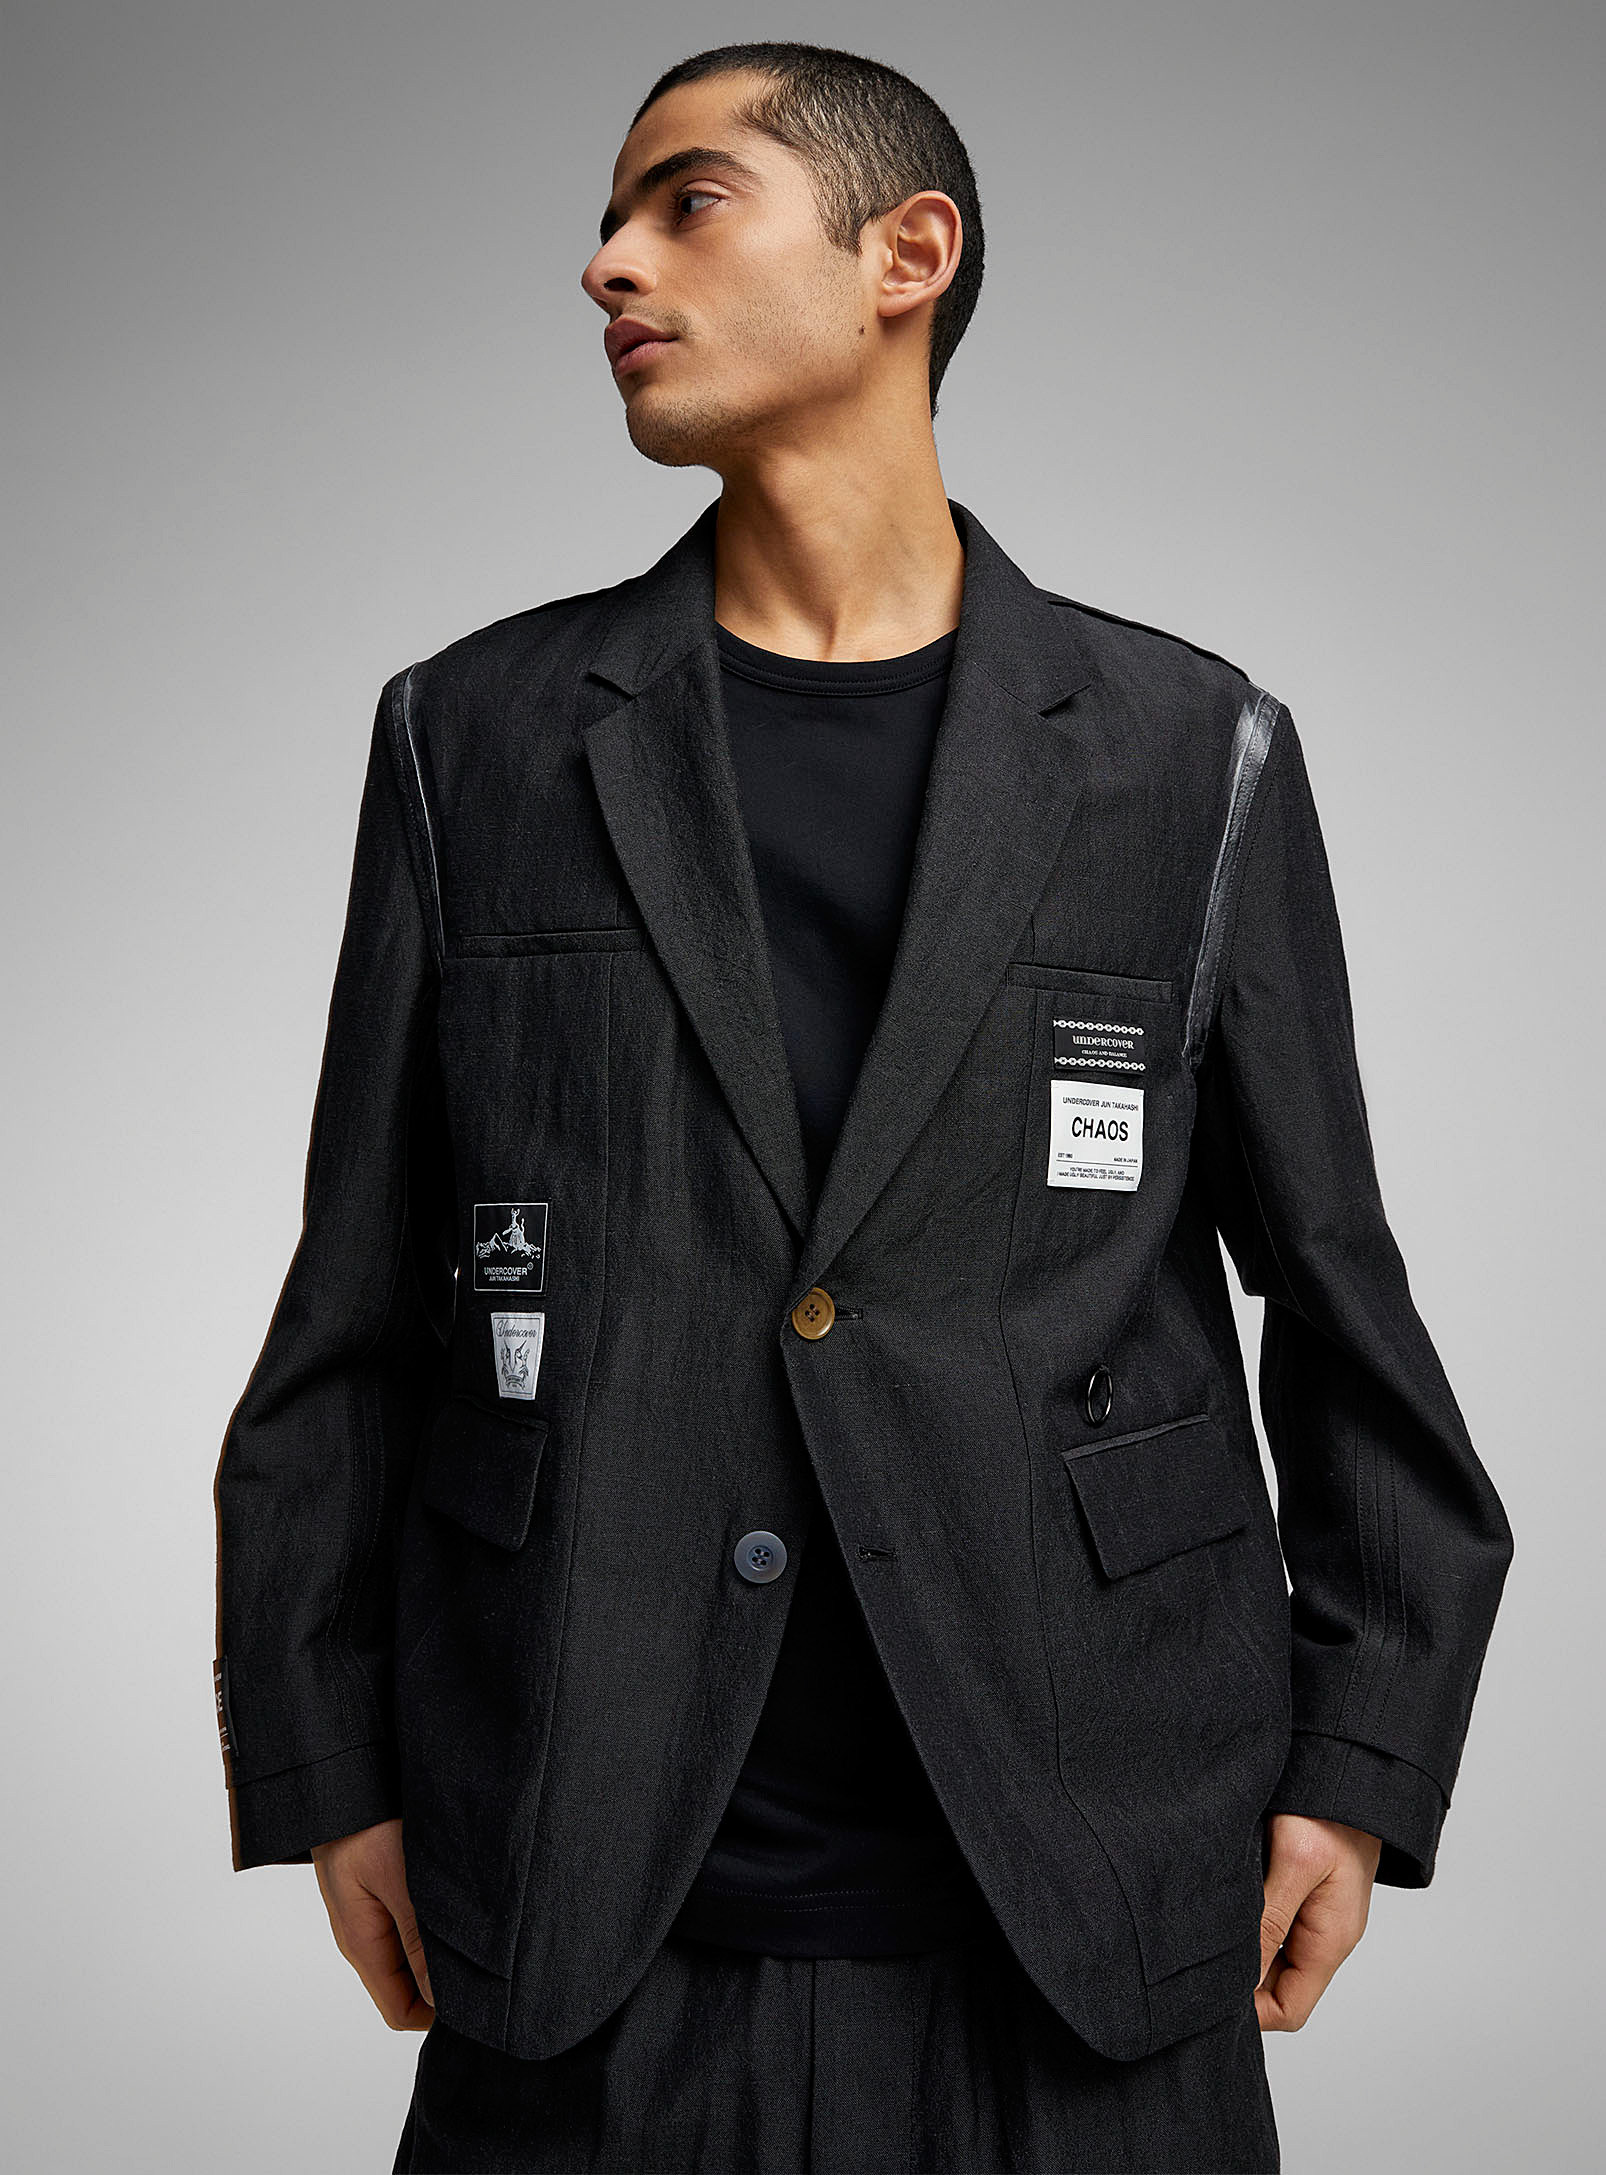 Undercover Signature Labels Supple Jacket In Charcoal